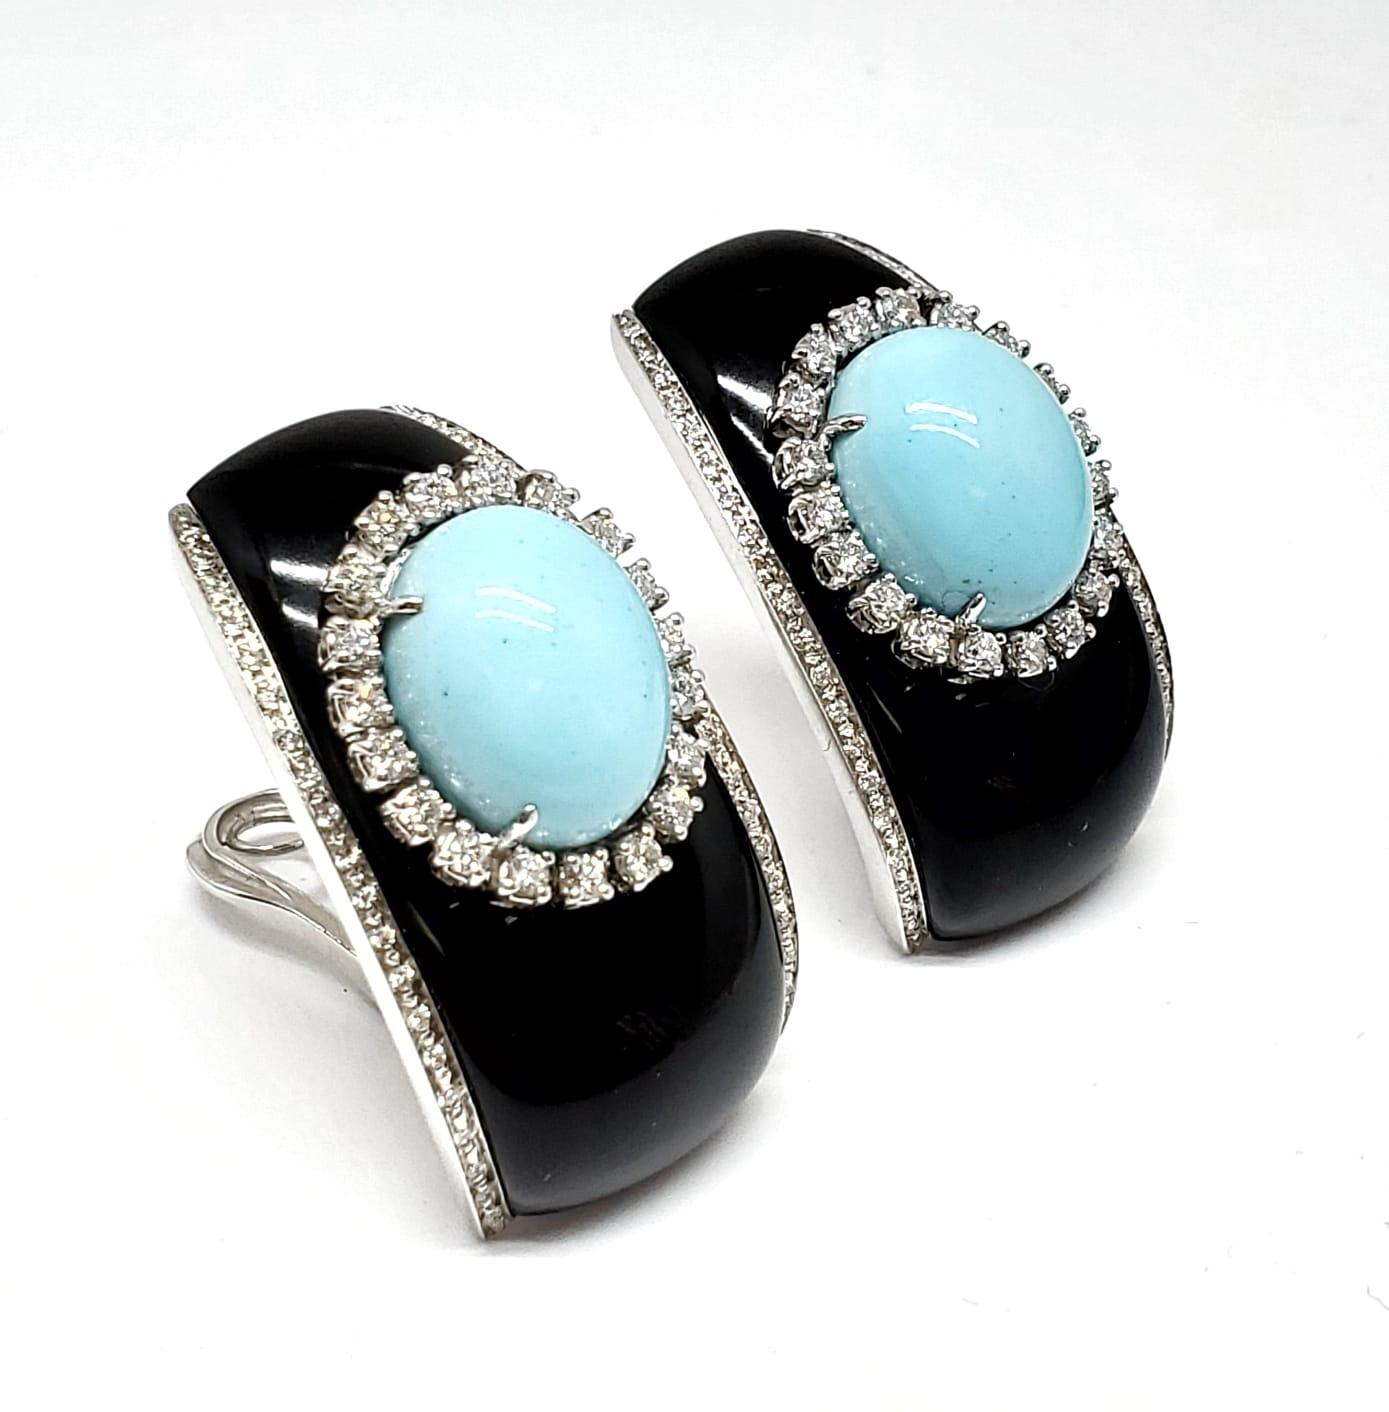 Andreoli Onyx Diamond Italian Turquoise Clip On 18k White Gold Earrings

These Andreoli earrings features:

- 1.61 carat Diamond
- 2.90 grams Reconstituted Italian Turquoise
- 7.20 grams Onyx
- 29.40 grams 18 Karat white gold
- Made in Italy